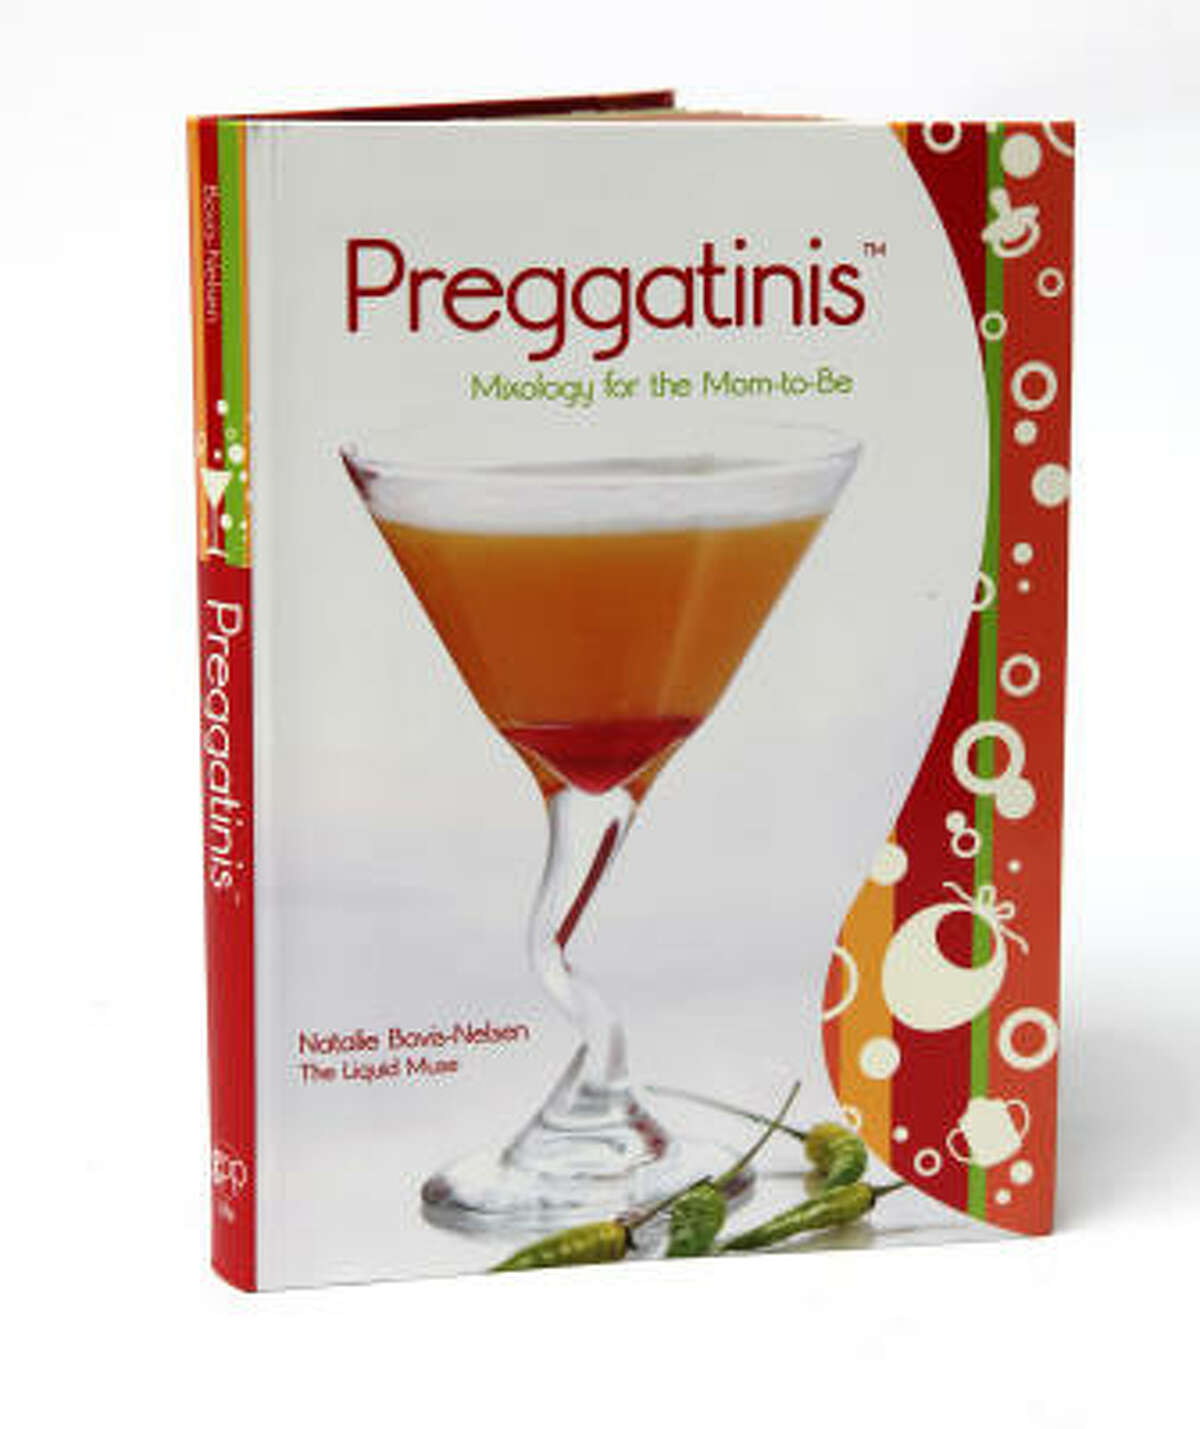 "Preggatinis: Mixology for the Mom-to-Be" encourages pregnant women to put some of the “happy” back in happy hour.